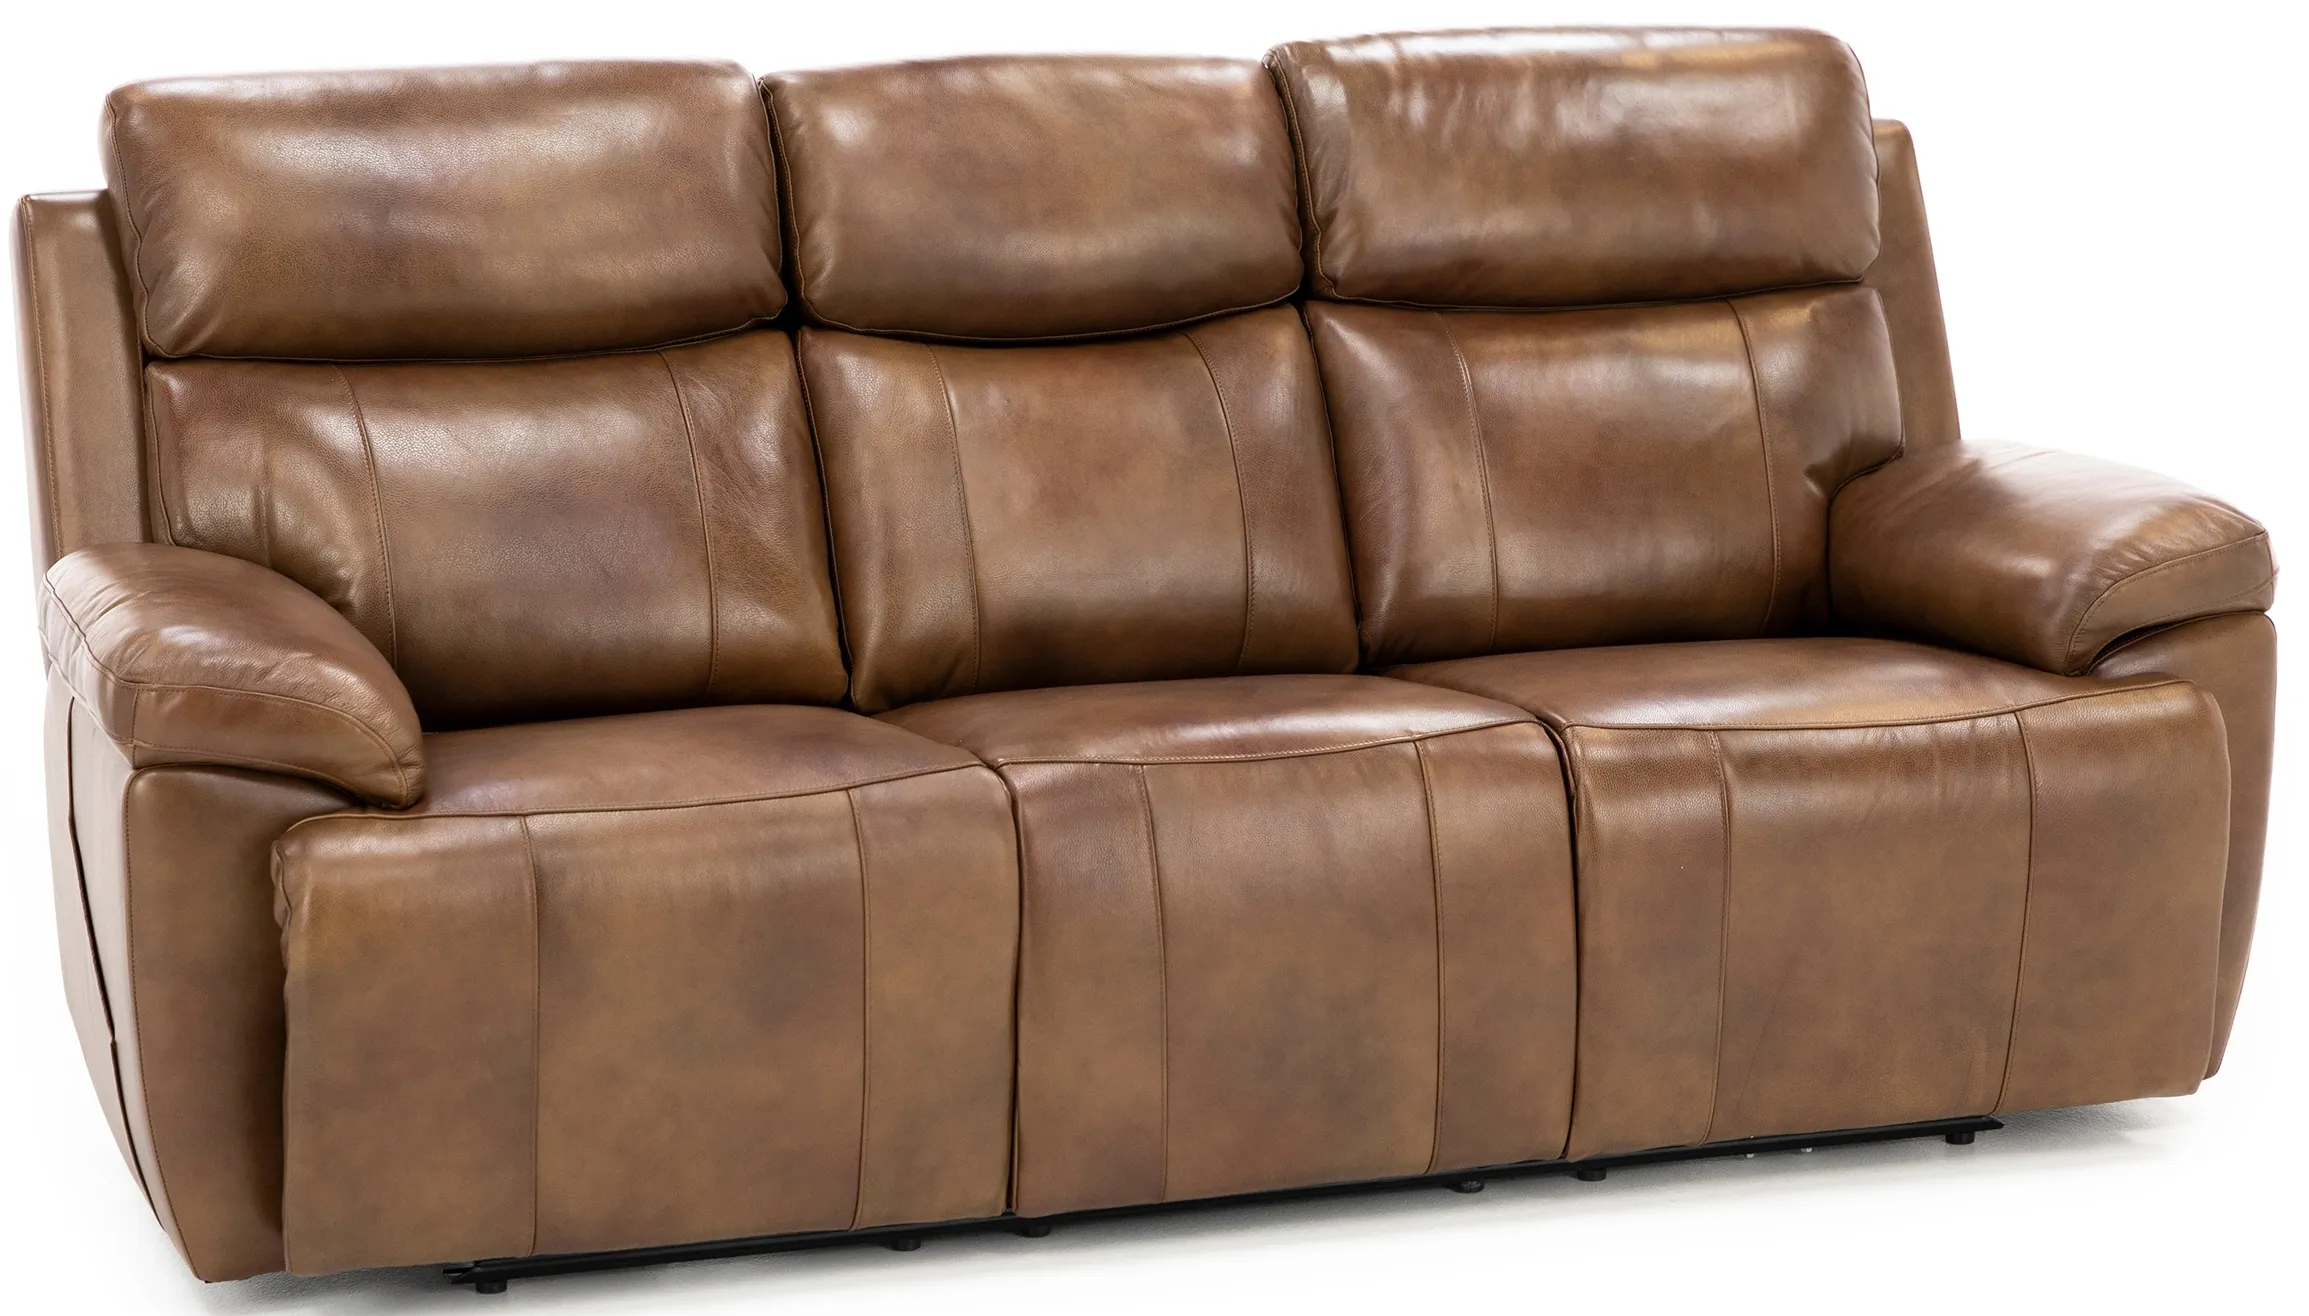 Direct Design Evanston Leather Fully Loaded Reclining Sofa with Air Massage and Drop Down Table in C